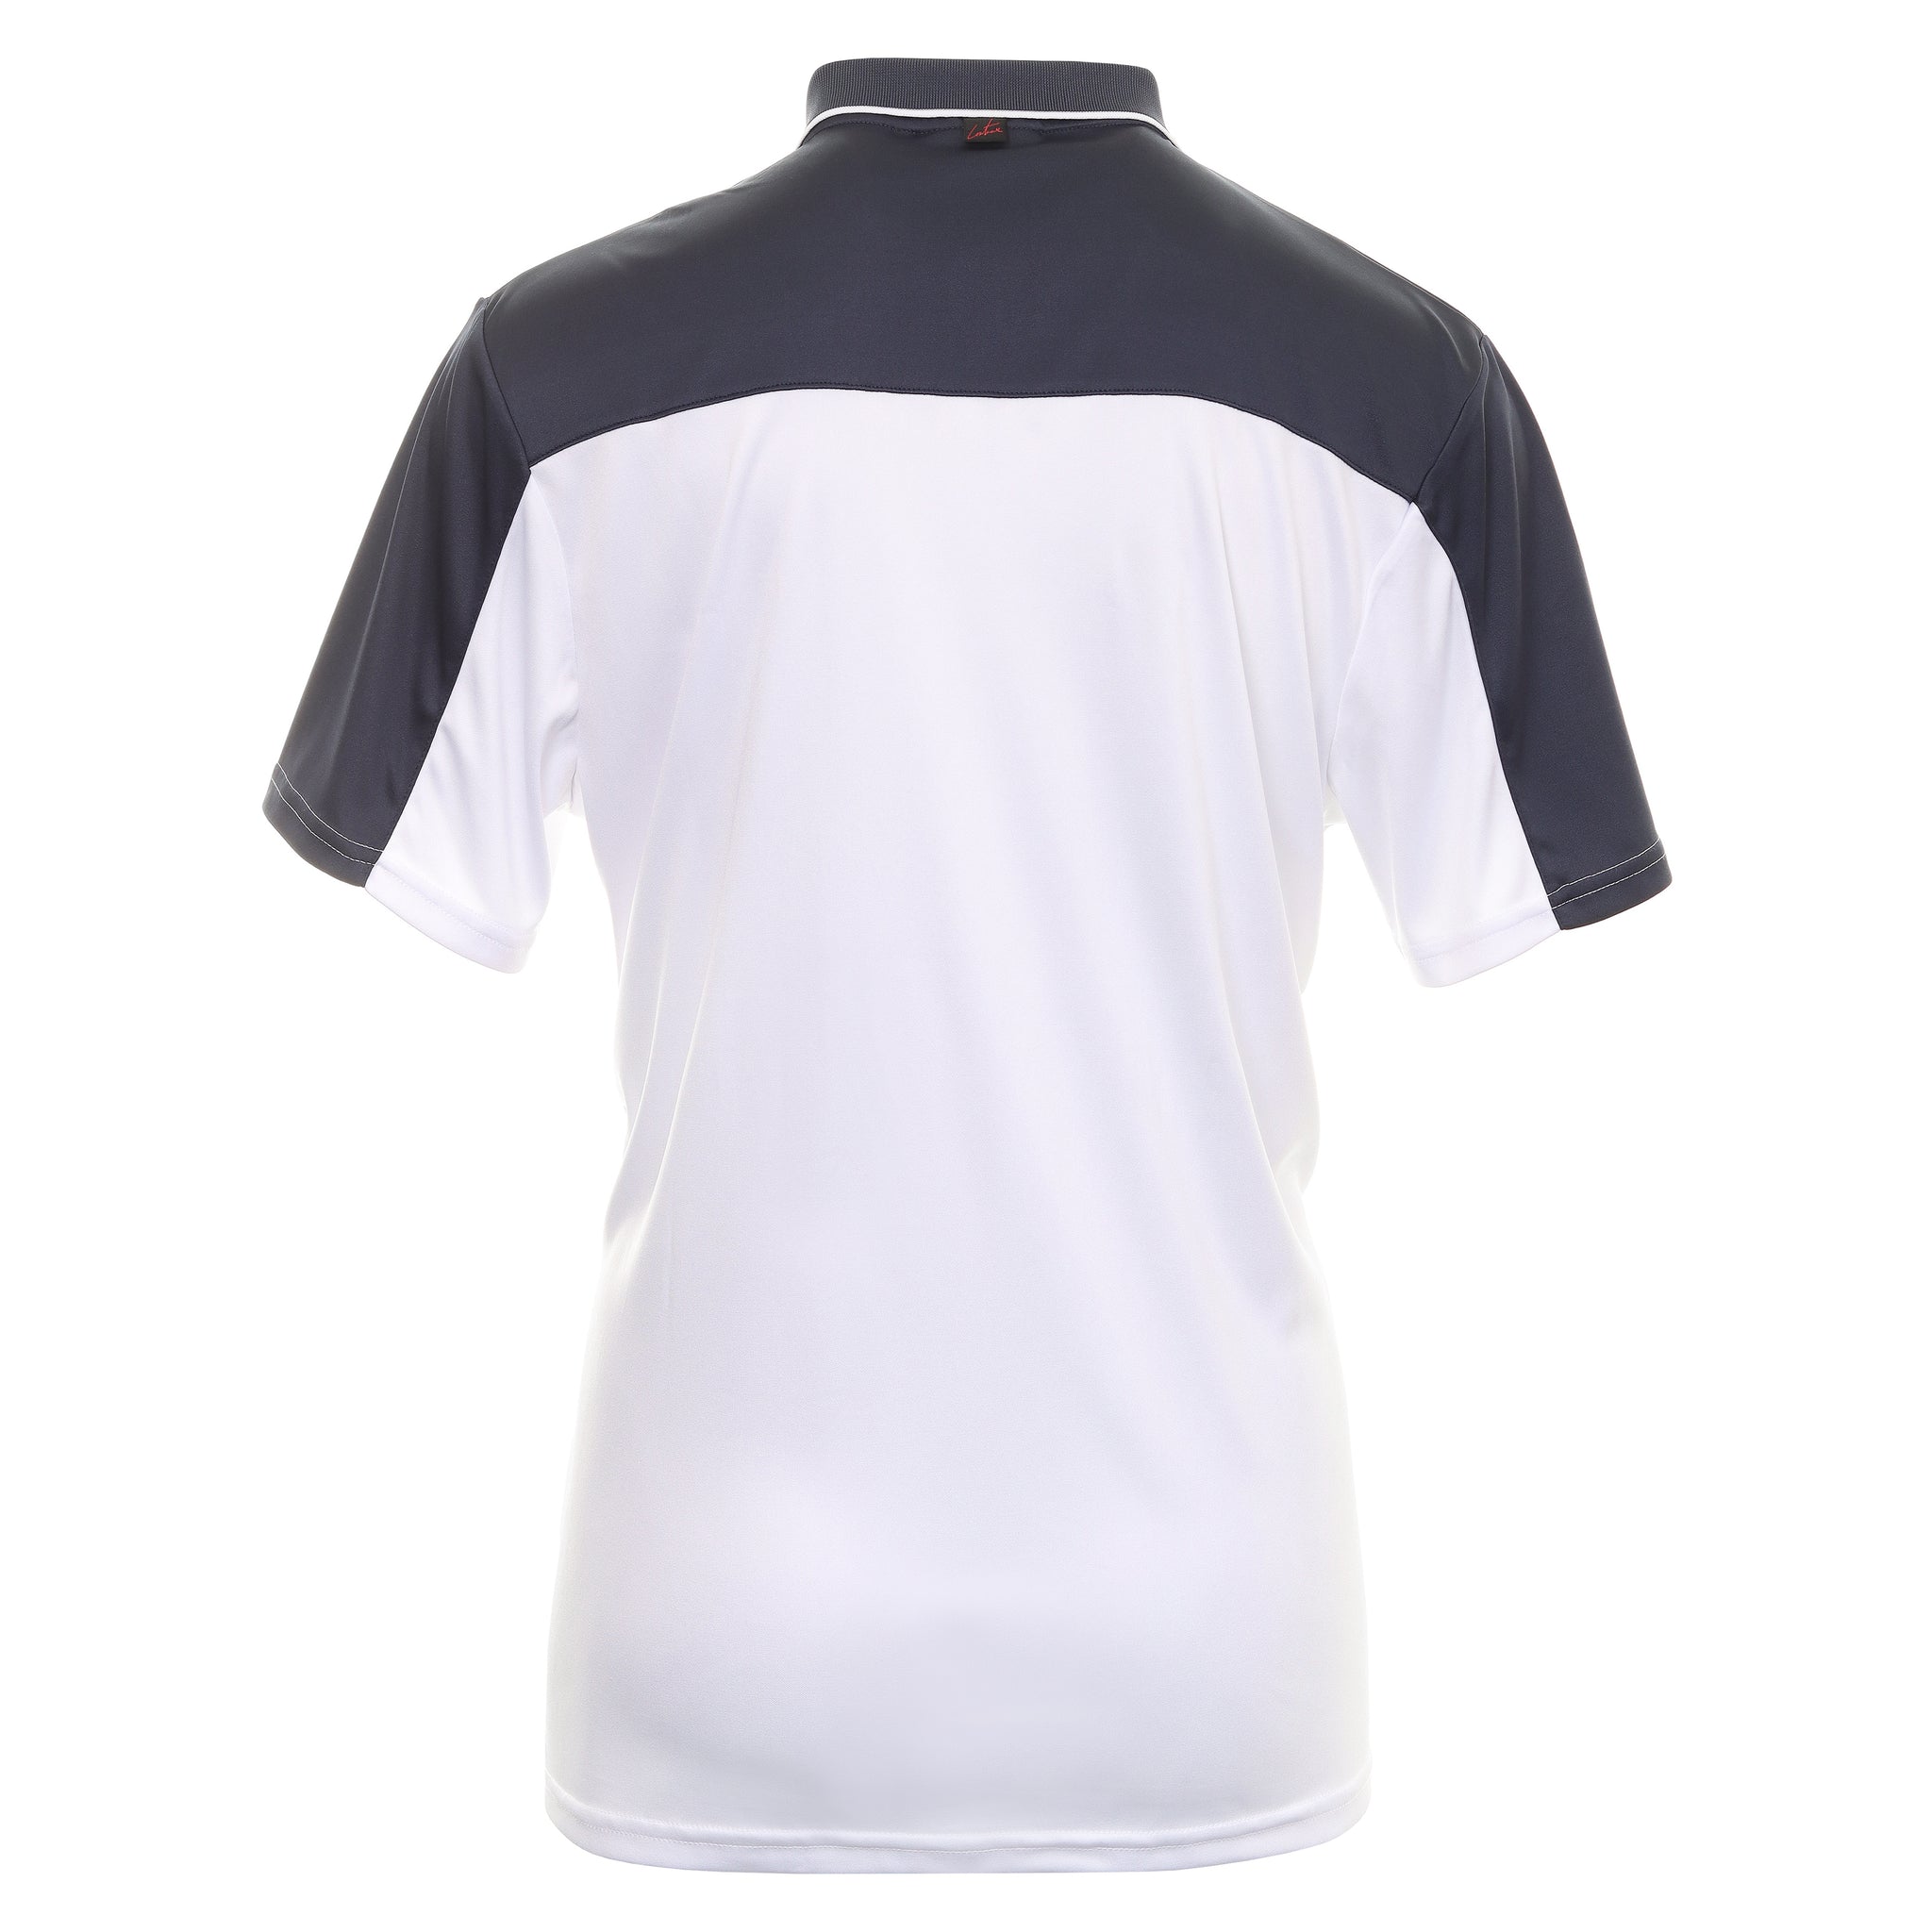 couture-club-golf-panelled-1-4-shirt-tccm1977-navy-white